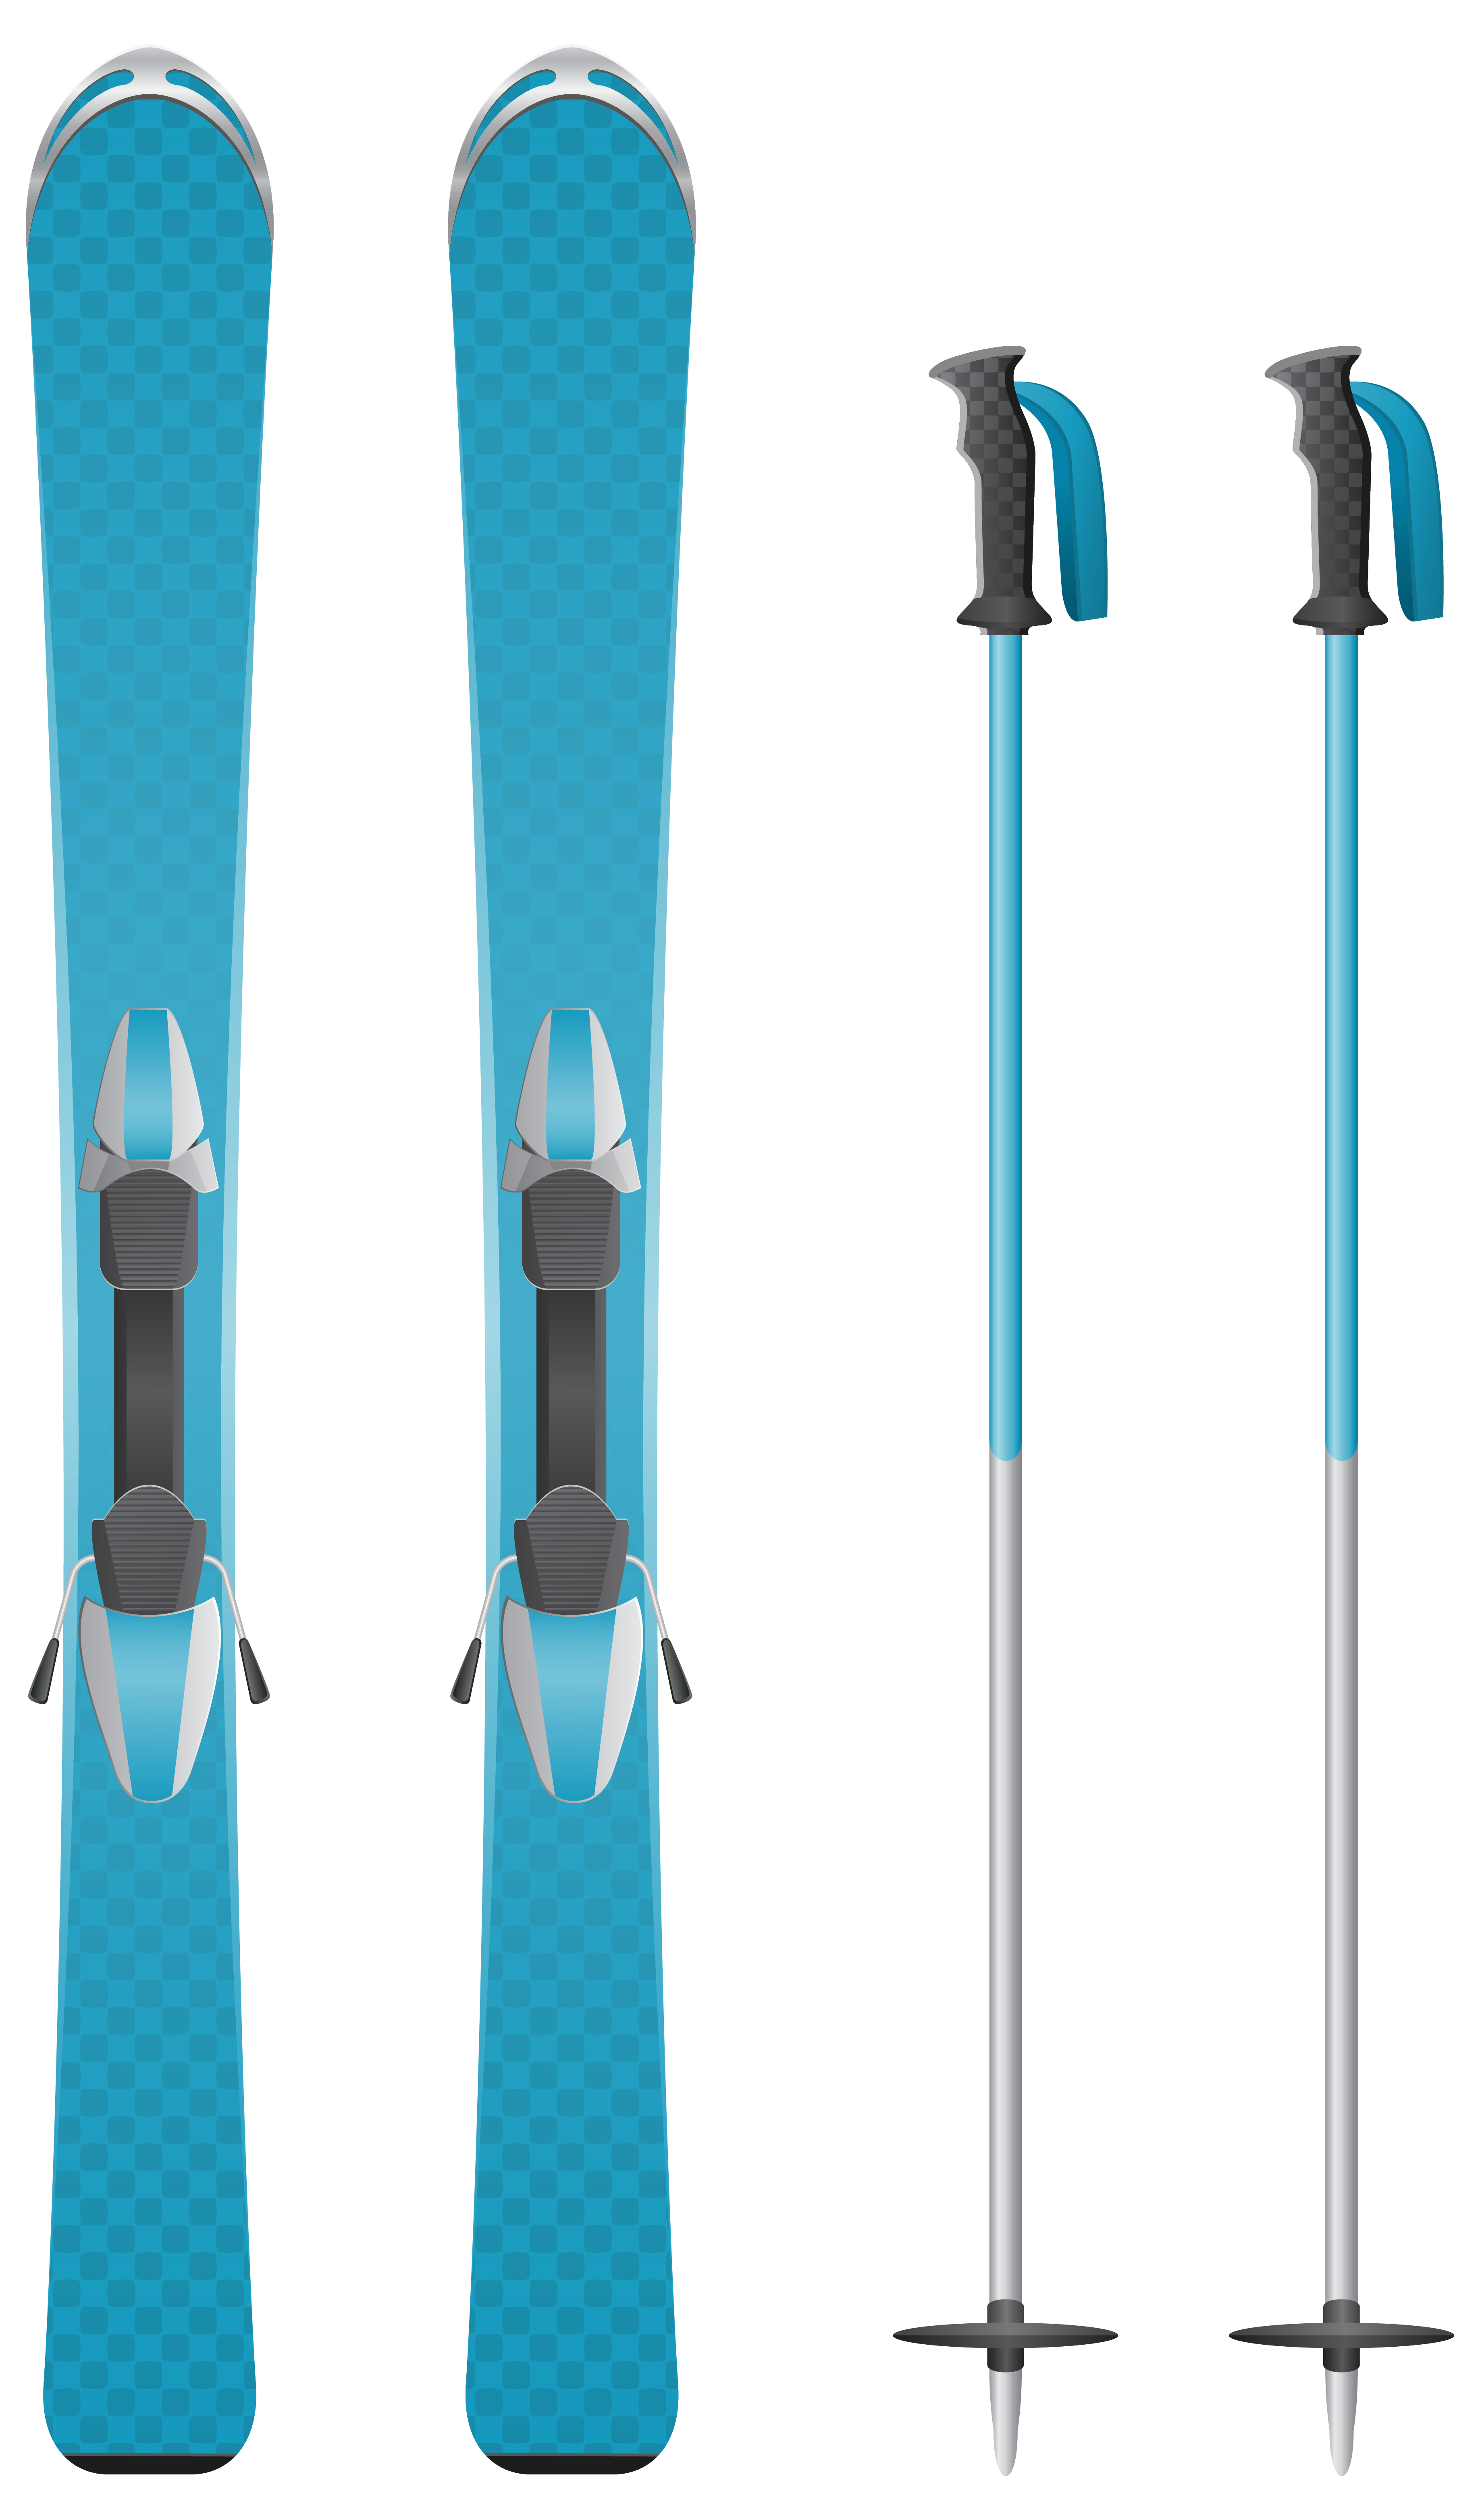 Skis Clipart 7 